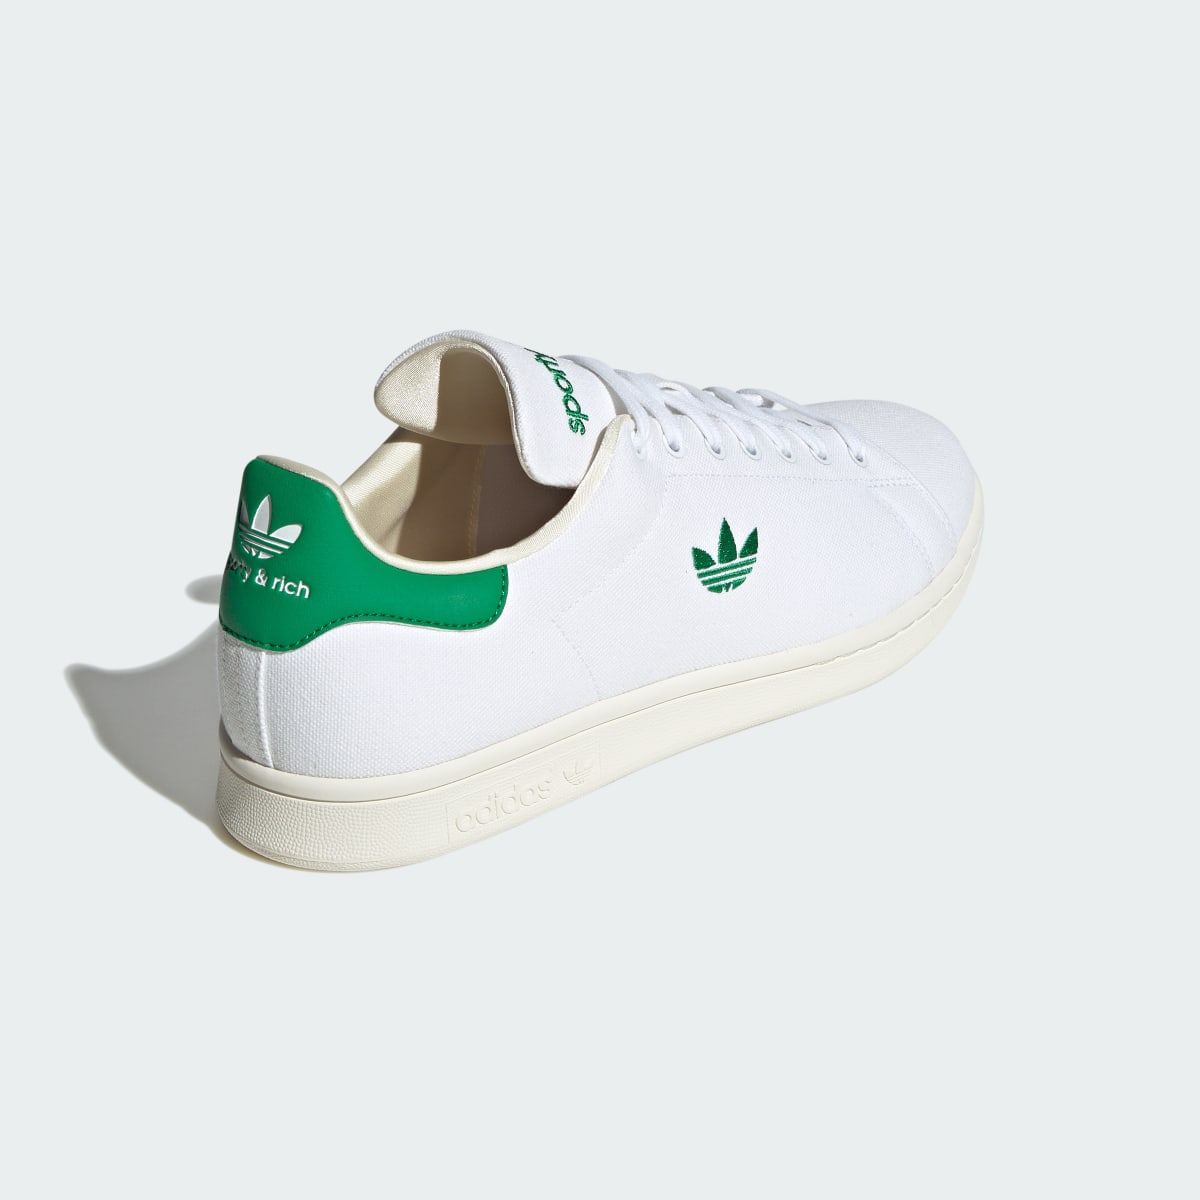 Adidas Stan Smith Sporty & Rich Shoes. 7